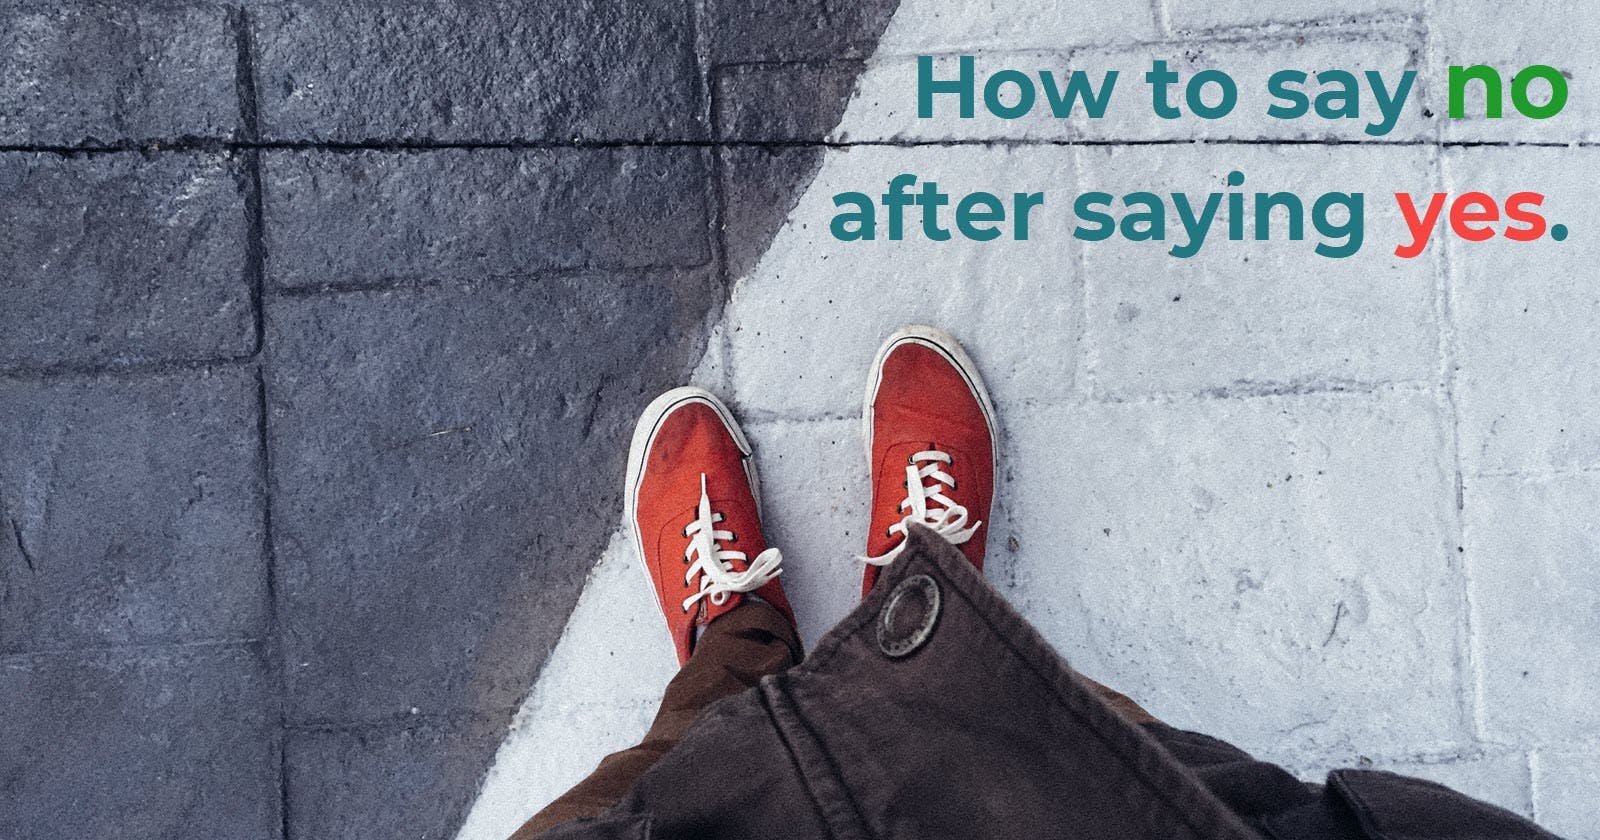 How to say "no" after having said "yes"